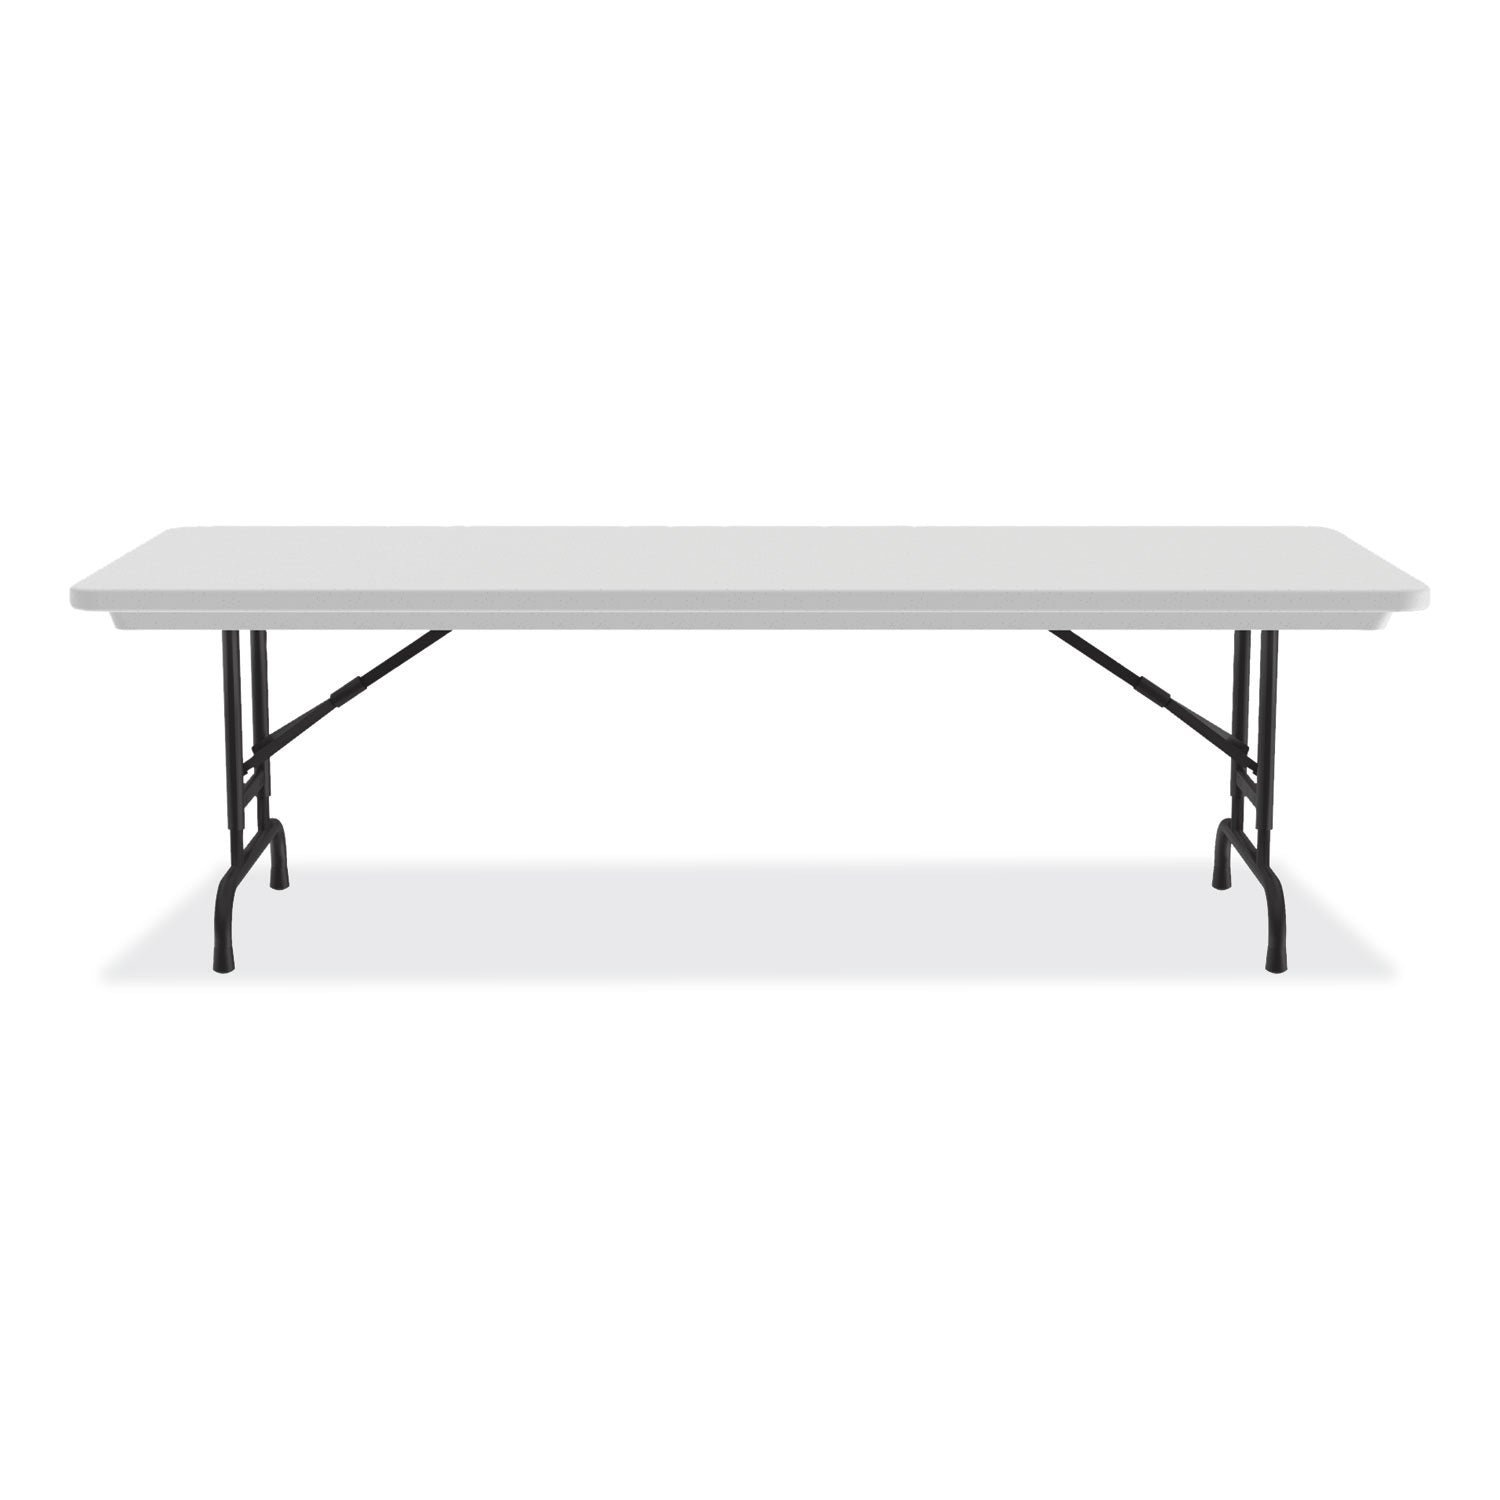 adjustable-folding-tables-rectangular-60-x-30-x-22-to-32-gray-top-black-legs-4-pallet-ships-in-4-6-business-days_crlra3060234p - 3